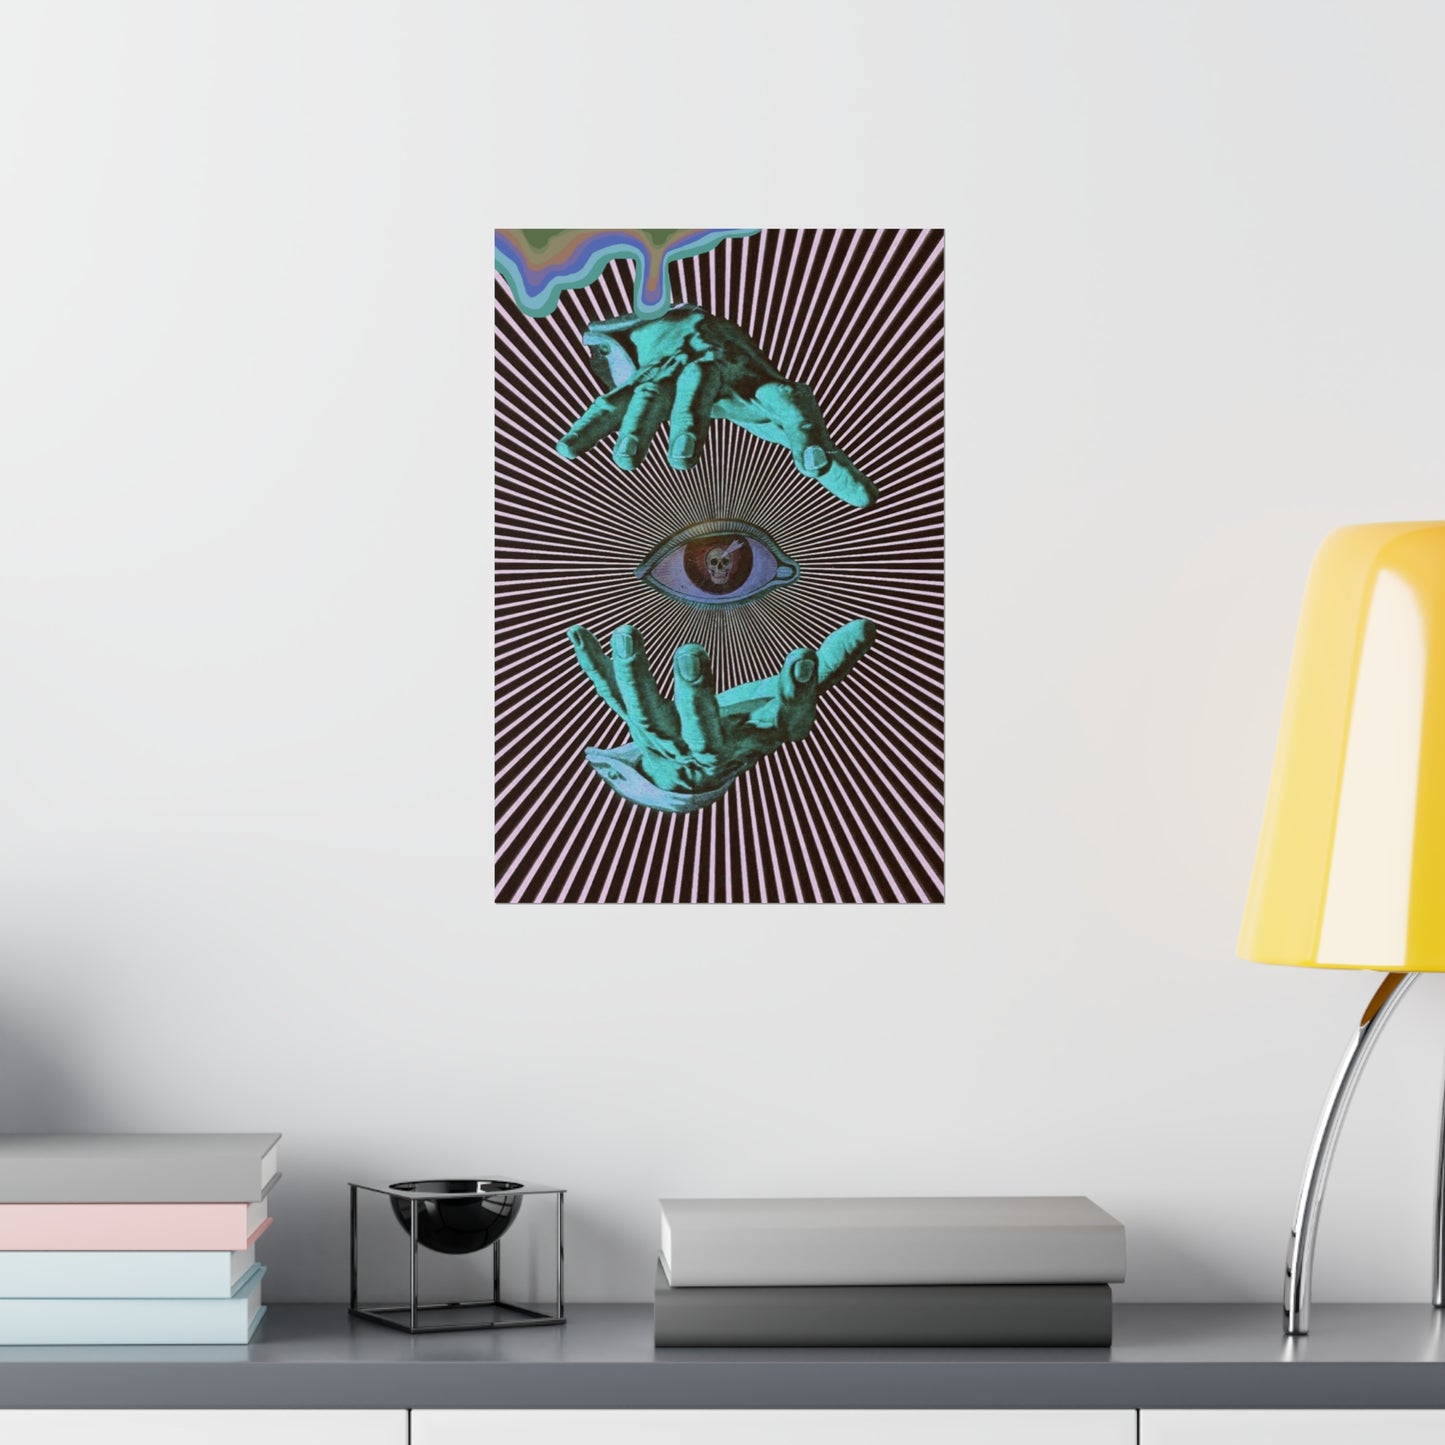 Create Your Reality - Poster Print